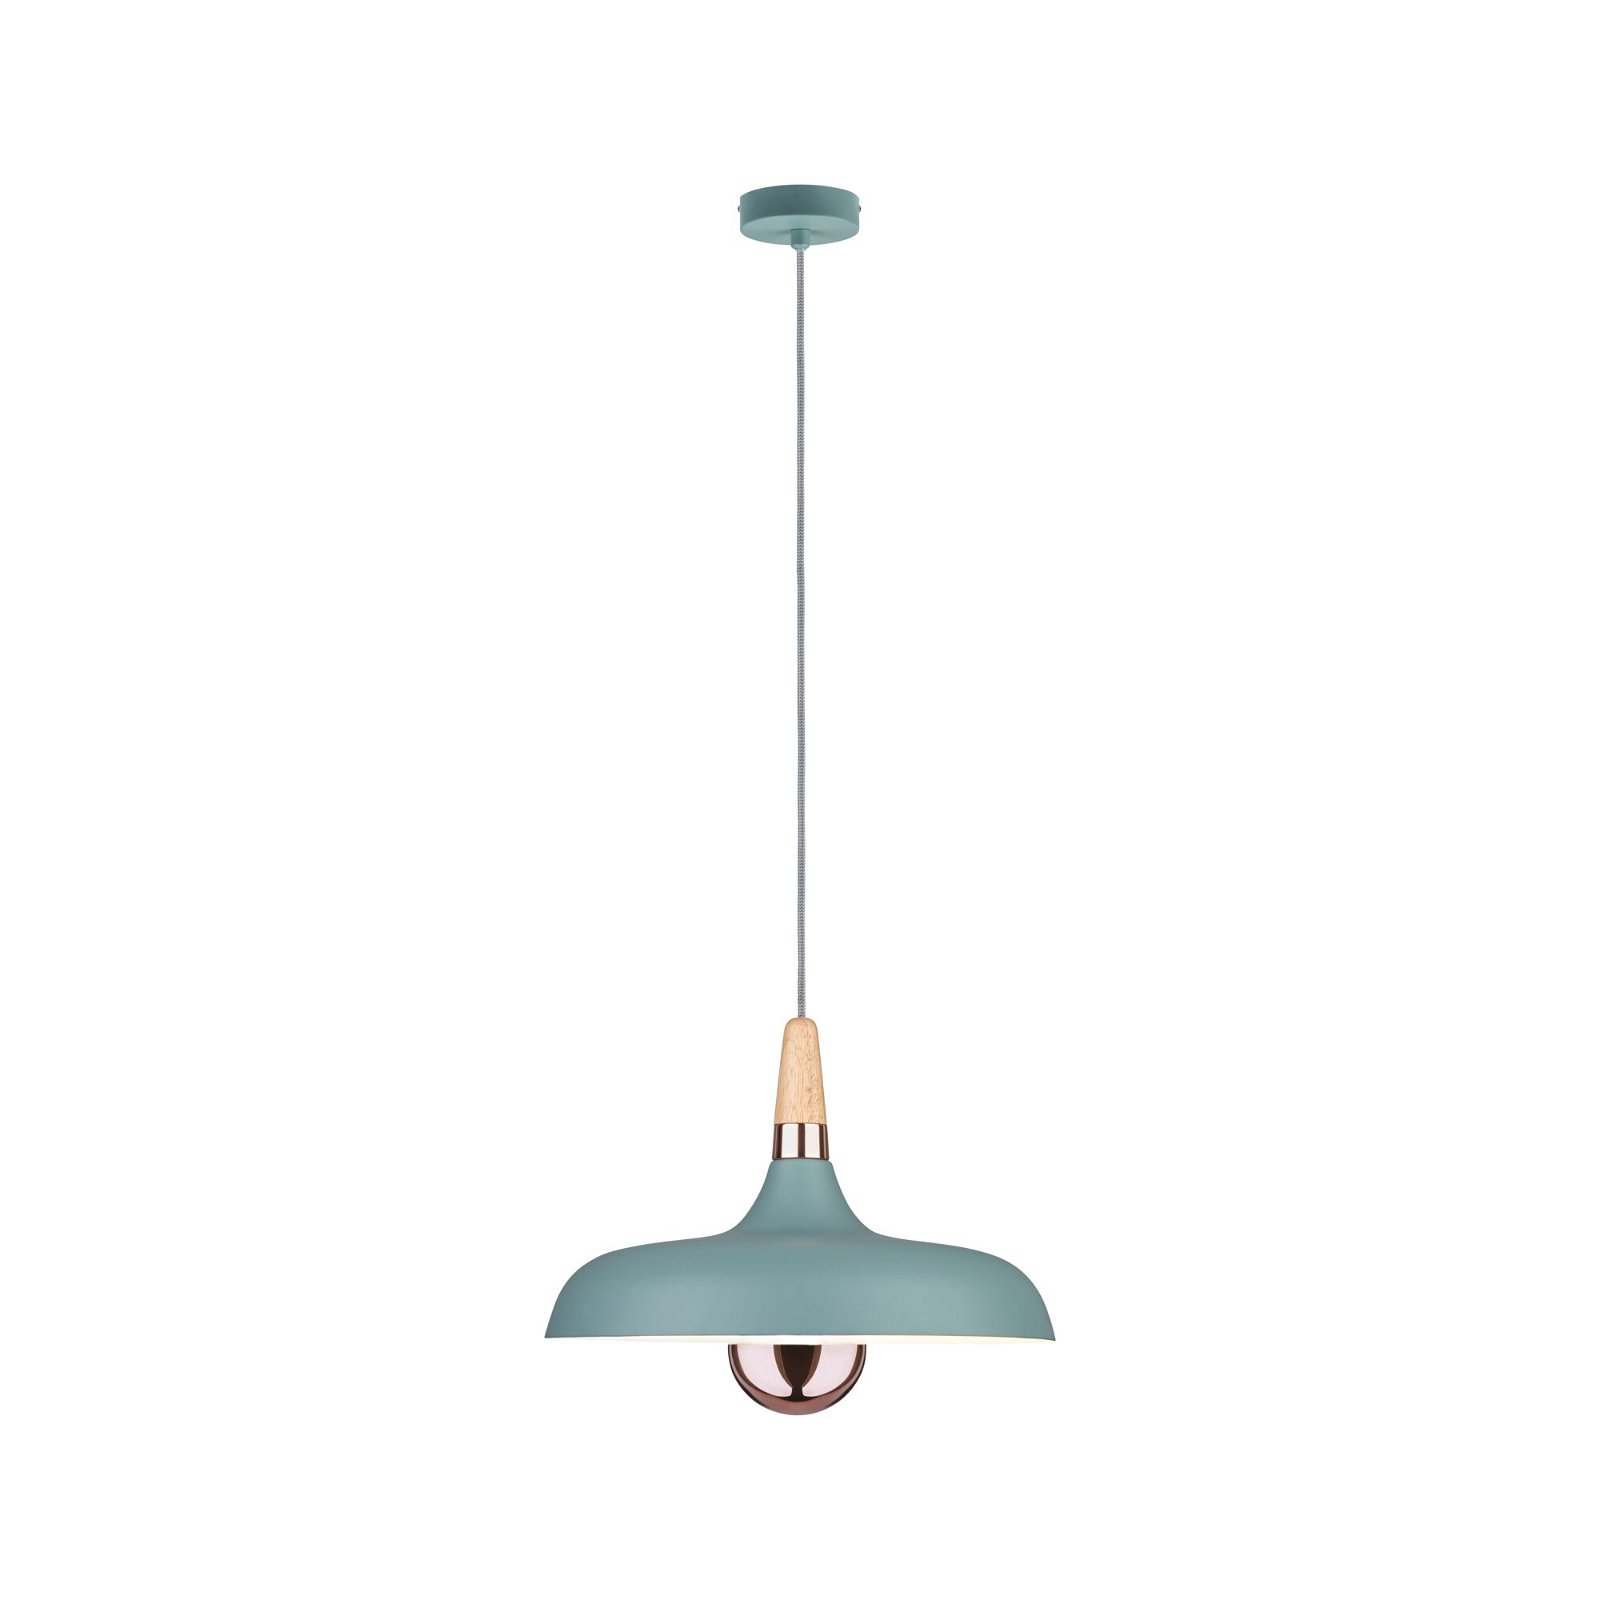 Neordic Pendant luminaire Juna E27 max. 20W Soft green/Copper/Wood dimmable Metal/Wood